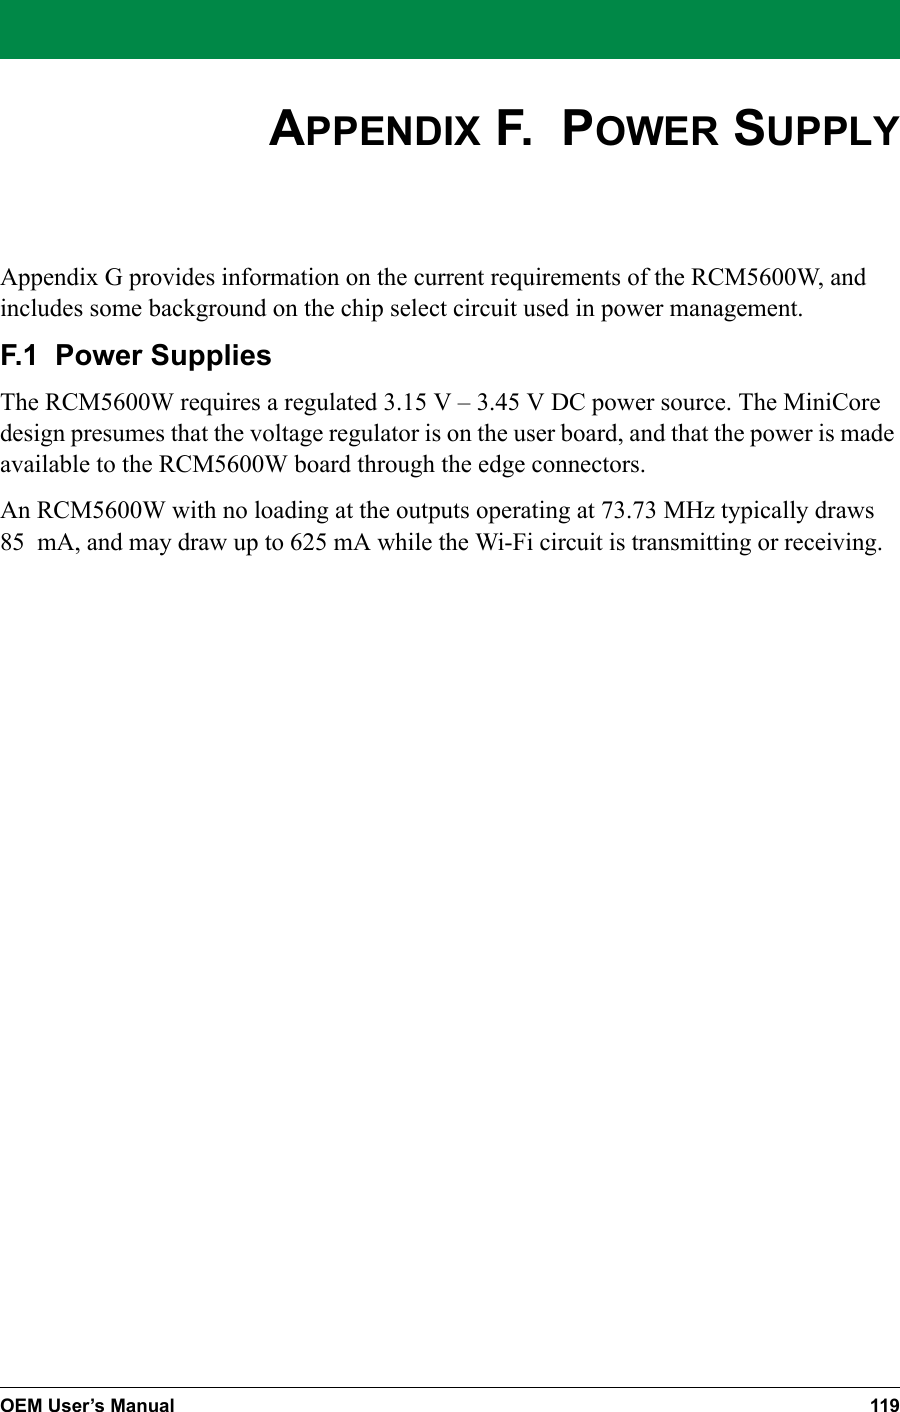 OEM User’s Manual 119APPENDIX F.  POWER SUPPLYAppendix G provides information on the current requirements of the RCM5600W, and includes some background on the chip select circuit used in power management.F.1  Power SuppliesThe RCM5600W requires a regulated 3.15 V – 3.45 V DC power source. The MiniCore design presumes that the voltage regulator is on the user board, and that the power is made available to the RCM5600W board through the edge connectors. An RCM5600W with no loading at the outputs operating at 73.73 MHz typically draws 85 mA, and may draw up to 625 mA while the Wi-Fi circuit is transmitting or receiving.